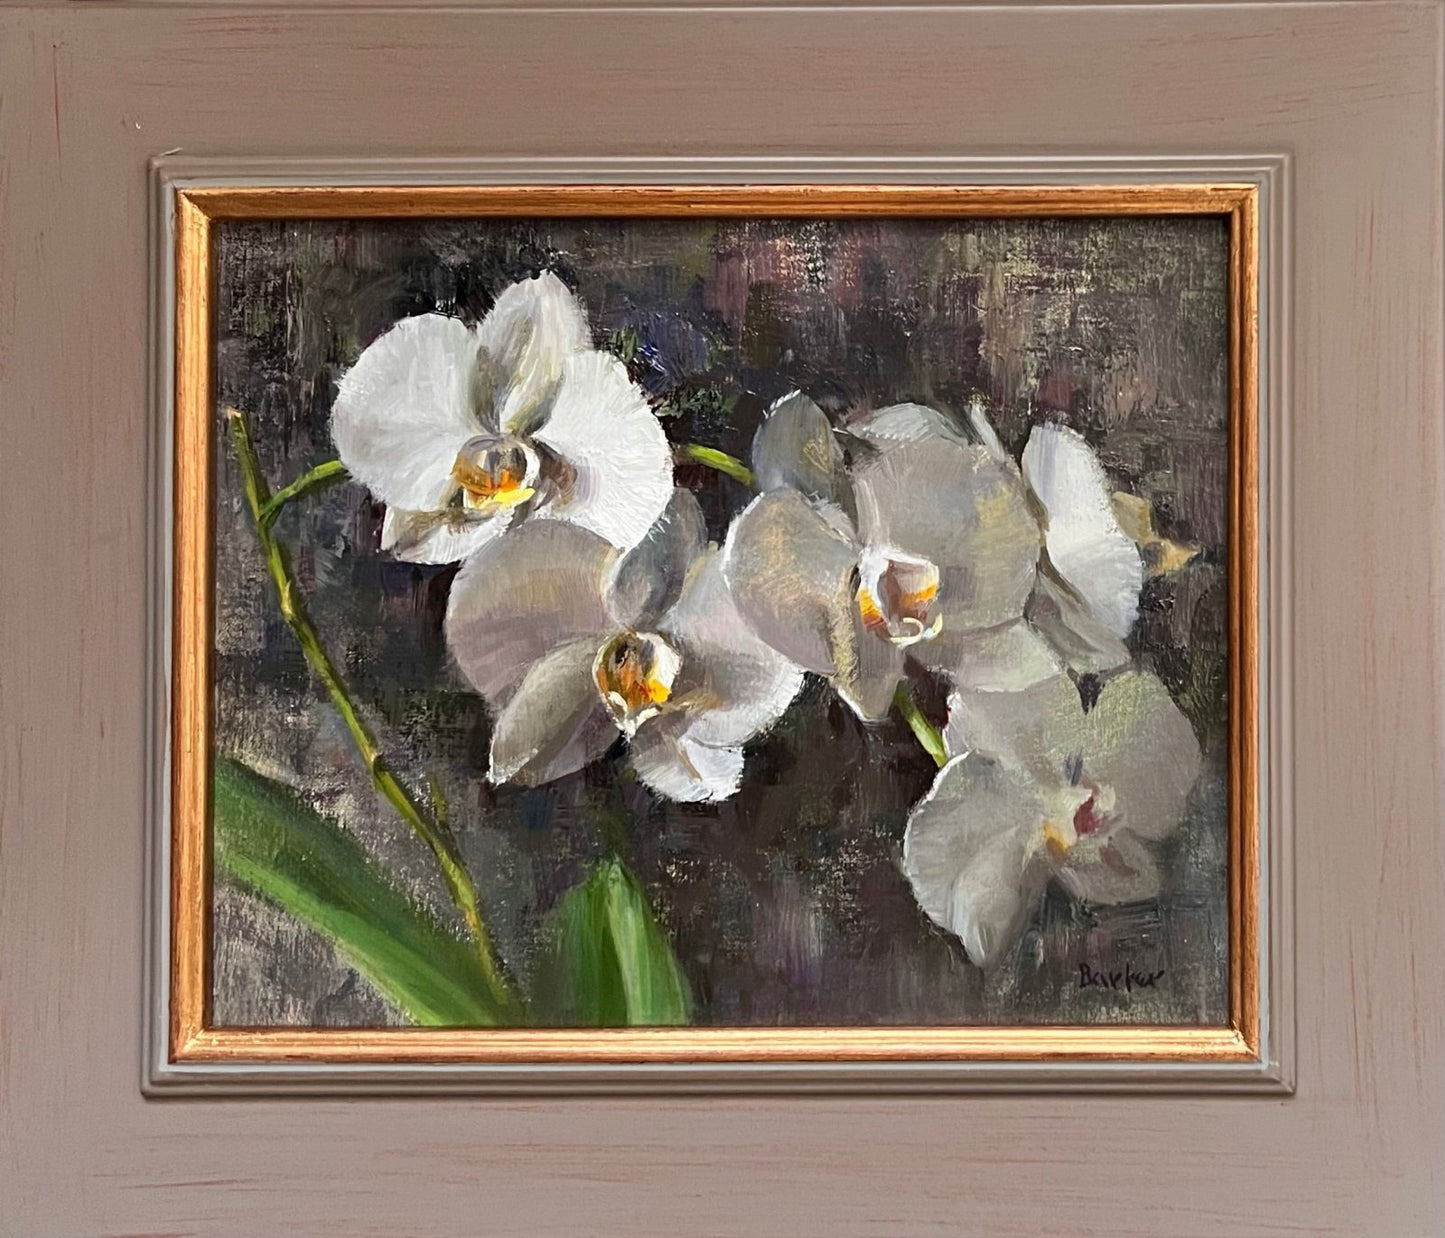 Second Time to Bloom by Stacy Barter at LePrince Galleries